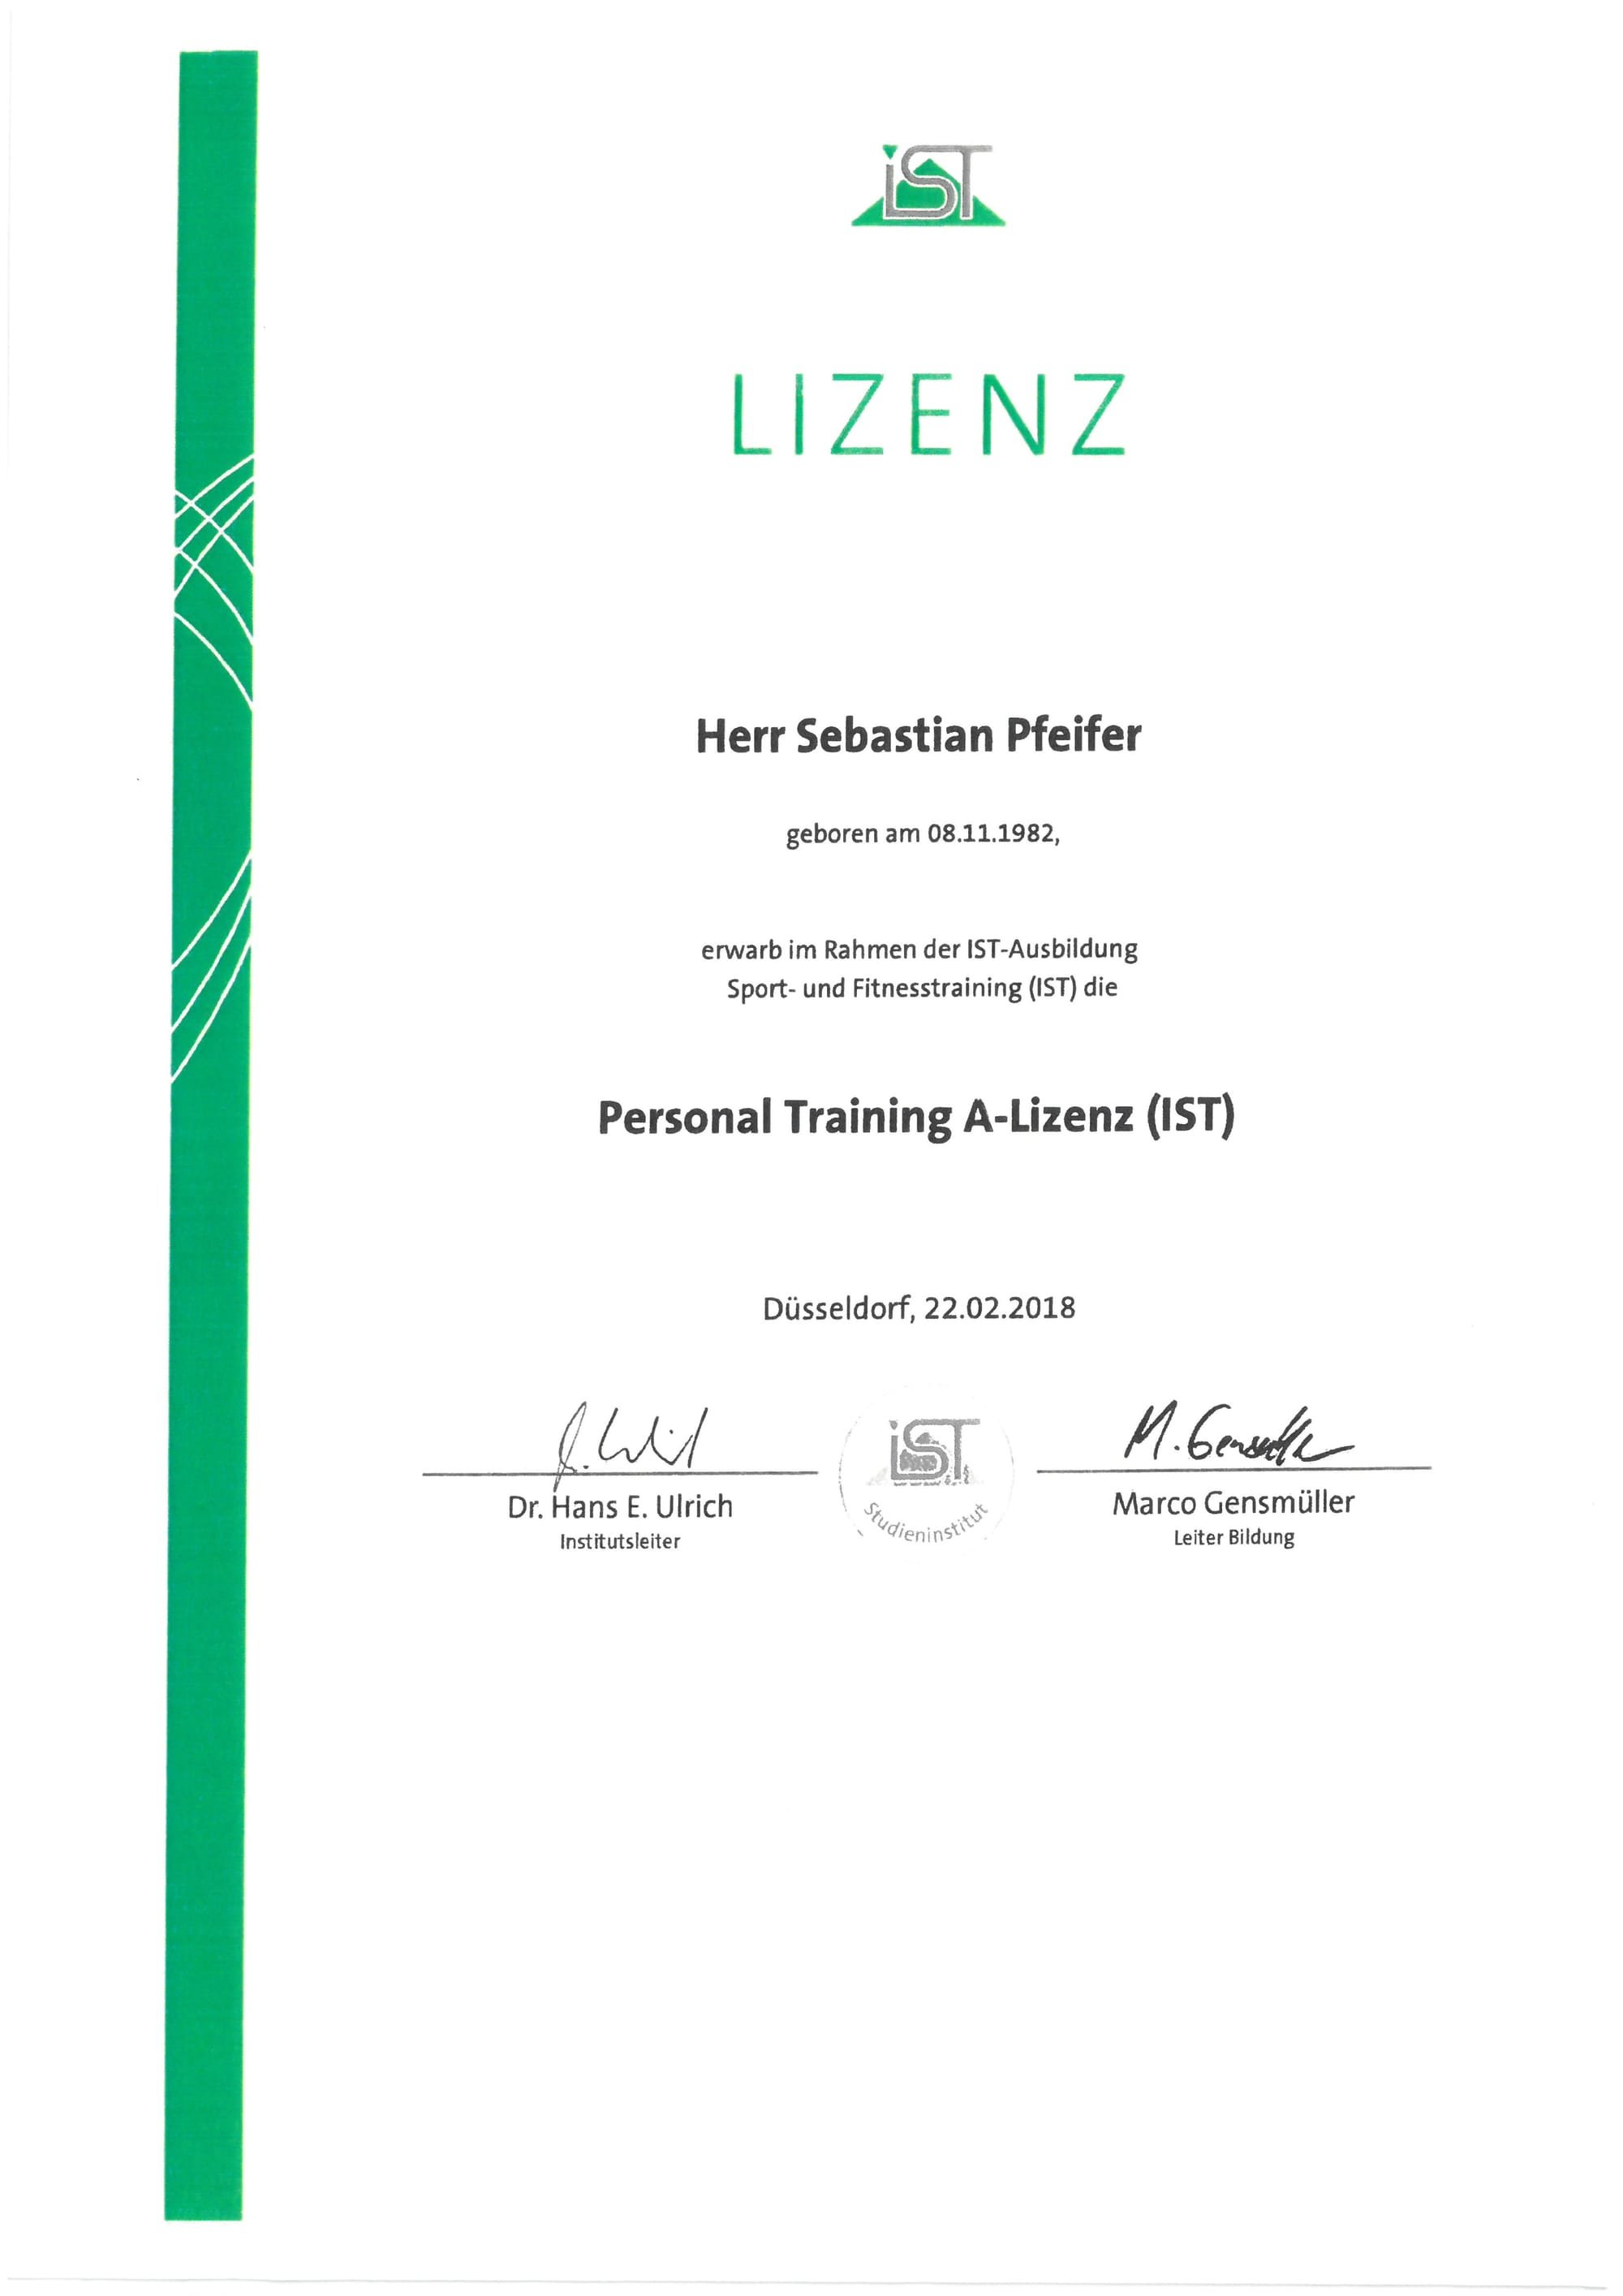 Personal Training A-Lizenz (IST)